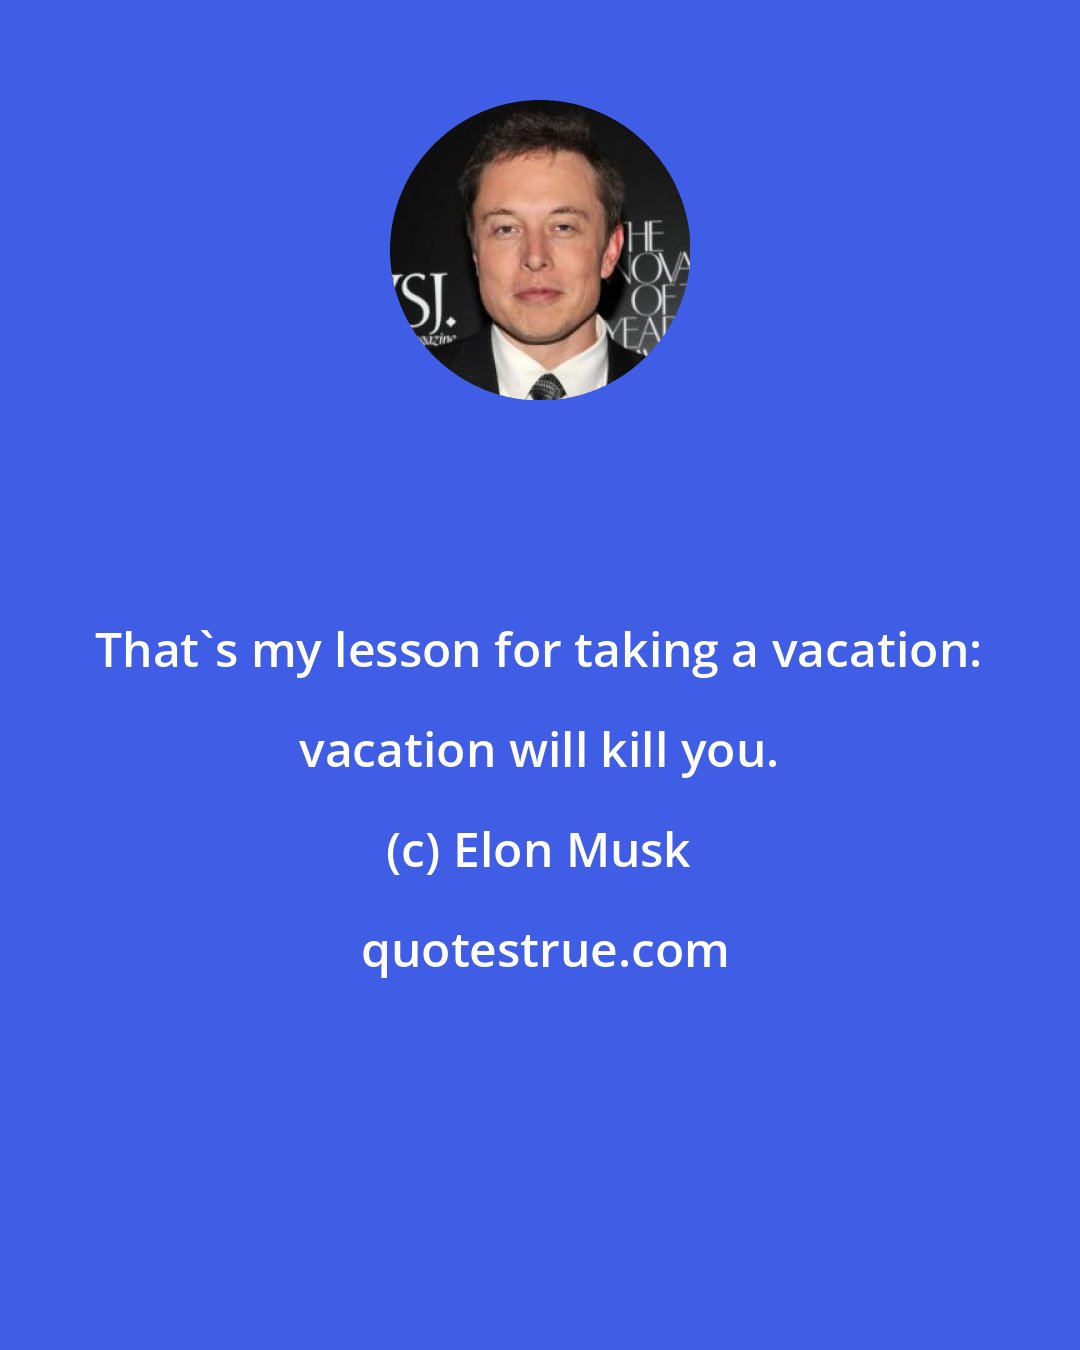 Elon Musk: That's my lesson for taking a vacation: vacation will kill you.